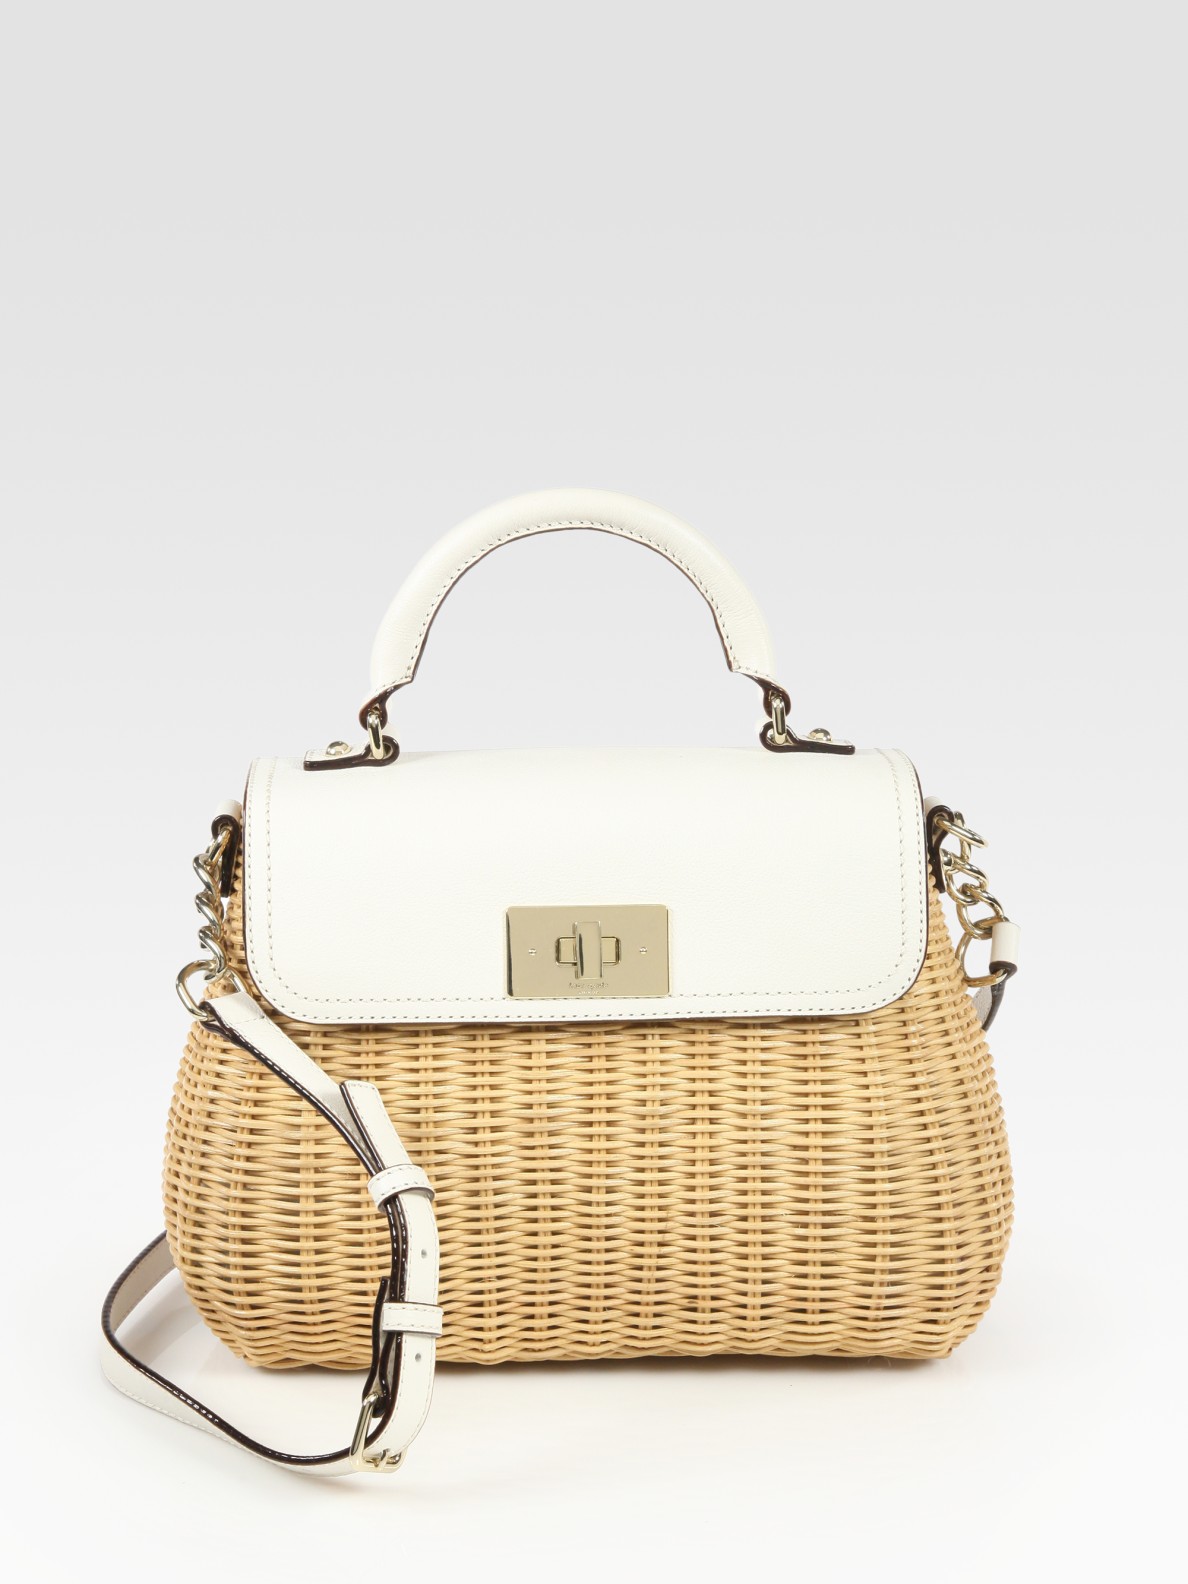 Kate Spade Little Nadine Wicker Leather Top Handle Bag in Natural | Lyst